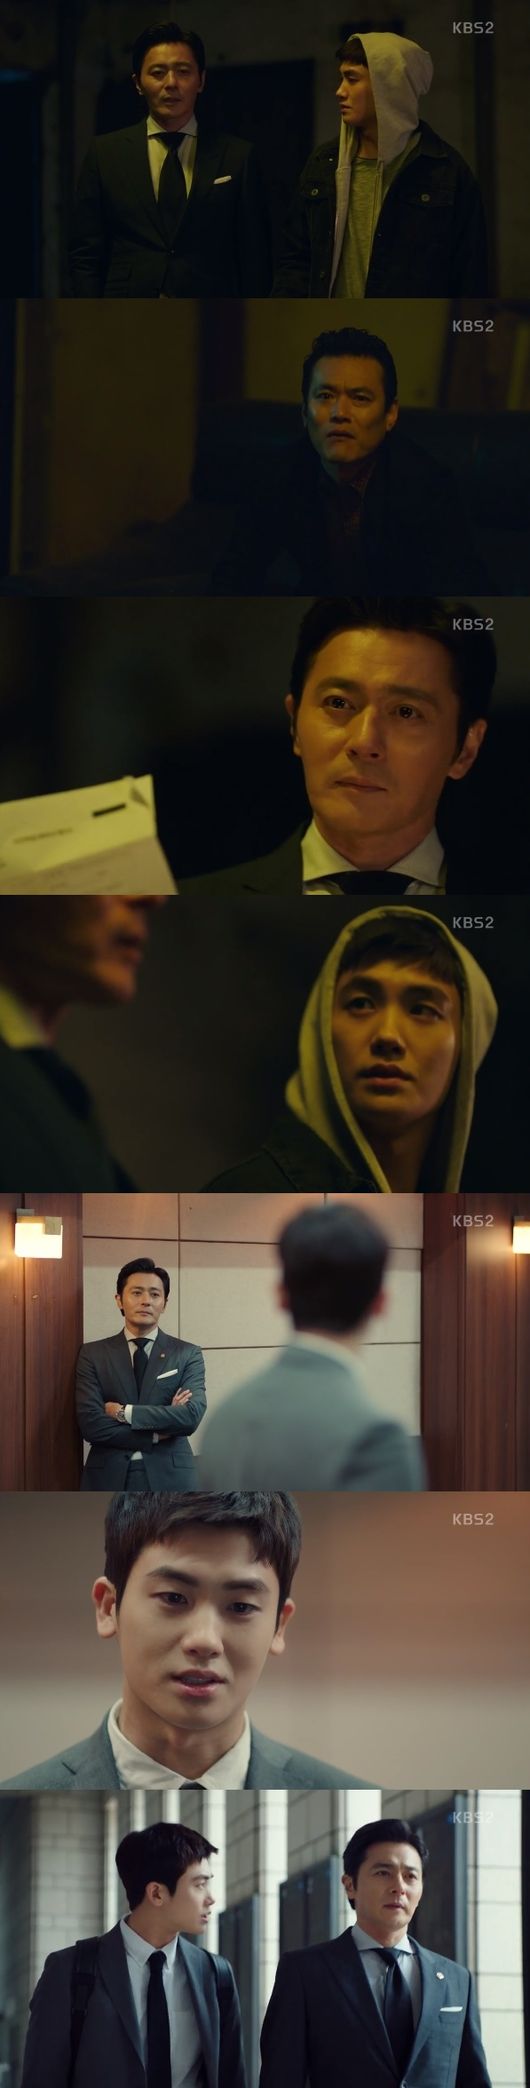 The appearance of Suits Jang Dong-gun looks rough, but it turns out that Park Hyung-sik is saved every time Danger.In the KBS2 drama Suits broadcast on the last 2 days, a famous rapper BewhY (BewhY), who found Law Firm Gang & Ham as a client, was put in a Danger where he would be caught by a fake lawyer of Park Hyung-sik.Ko Yeon-woo approached the hip-hop club by revealing his fanship to make BewhY a client; Ko Yeon-woo, who was drunk and drunk, said, I am a fake lawyer.When BewhY asked, Really? Is it a real fake lawyer?I am a real fake lawyer. The next day, BewhY appeared in the office of Kang & Ham Chae Geun-sik (Choi Ki-hwa), and Ko Yeon-woo was surprised.Chae Geun-sik said, Who told you to come in without knocking? And BewhY asked, Uh! Im not cut yet, a fake lawyer?Kang Ha-yeon (Jin Hee-kyung) and Chae Geun-sik looked at Ko Yeon-woo when they said it was fake, and they could be caught as fake lawyers.If Ko Yeon-woo is suspected in the next development, he raised the question of what sense he would avoid Danger by Miniforce Seok.Earlier, Ko Yeon-woo was chased by Detectives while delivering a bag containing drugs in the ruse of Park Joon-pyo (Lee Kyung-min), a chaebol.Ko Yeon-woo, who visited the interview room for a new lawyer, hurried in, where he met Miniforce and was able to send the Detectives back.At this time, Miniforce, who recognized the genius of Ko Yeon-woo, was selected as a new lawyer for Law Firm.After that, Ko met with gangsters who visited Law Firm Gang & Ham to find drugs, and fled to the rooftop.Ko went to the gangsters azit late at night to solve it himself and faced a dangerous moment.What do the police really want? Is it a rich son, an addict, or a ridiculous illegal drug maker?If you go in this time, you can fall to the highest weapon, not six to seven years. The gangsters changed their faces and were really scared.Thanks to the Miniforce seat, Ko Yeon-woo also solved the problem with the gangsters and handed over Danger safely.